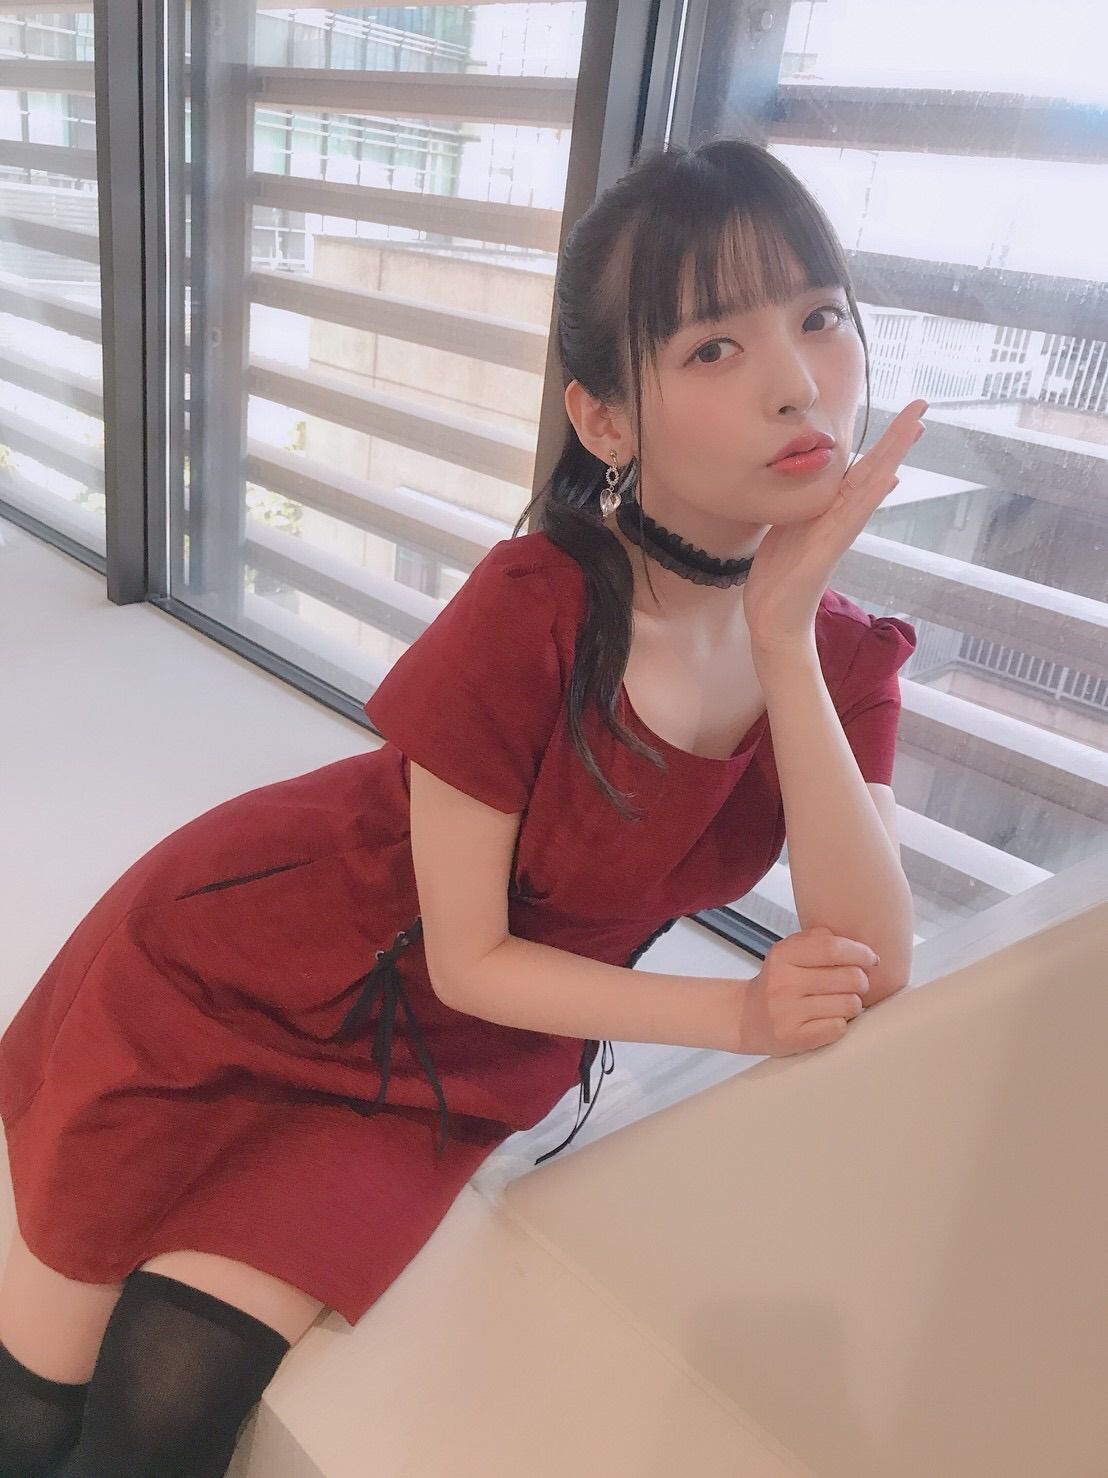 Sumire Uesaka "to emphasize the thigh... W] also erotic image offer Wwwwwww 1